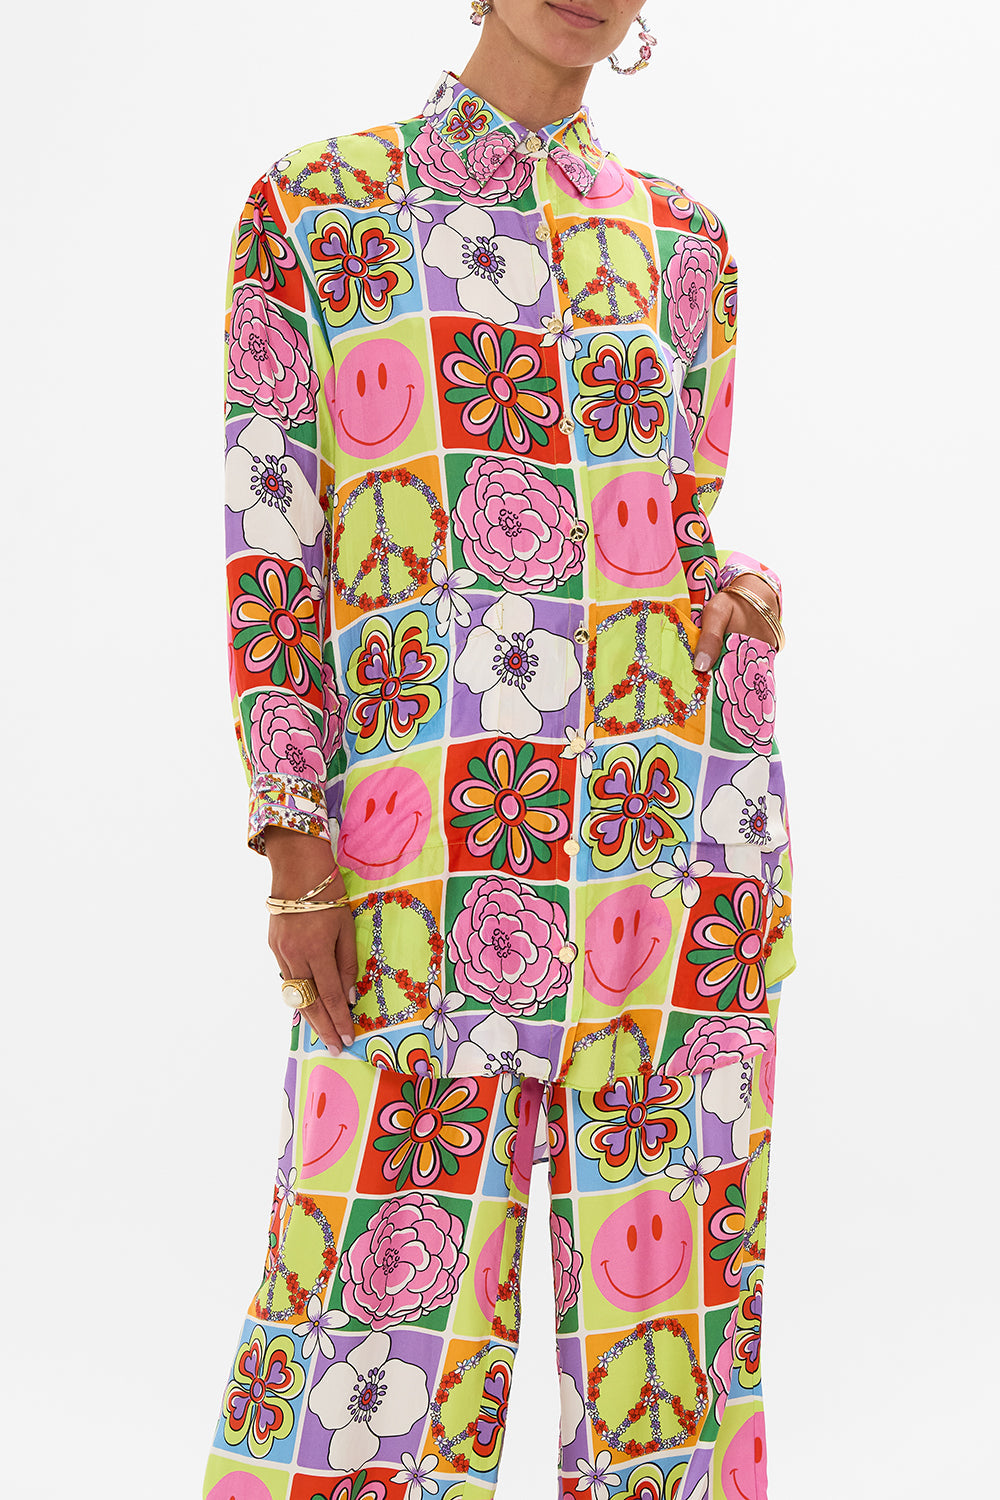 CAMILLA floral Shirt Tunic with Pockets in Cosmic Prairie